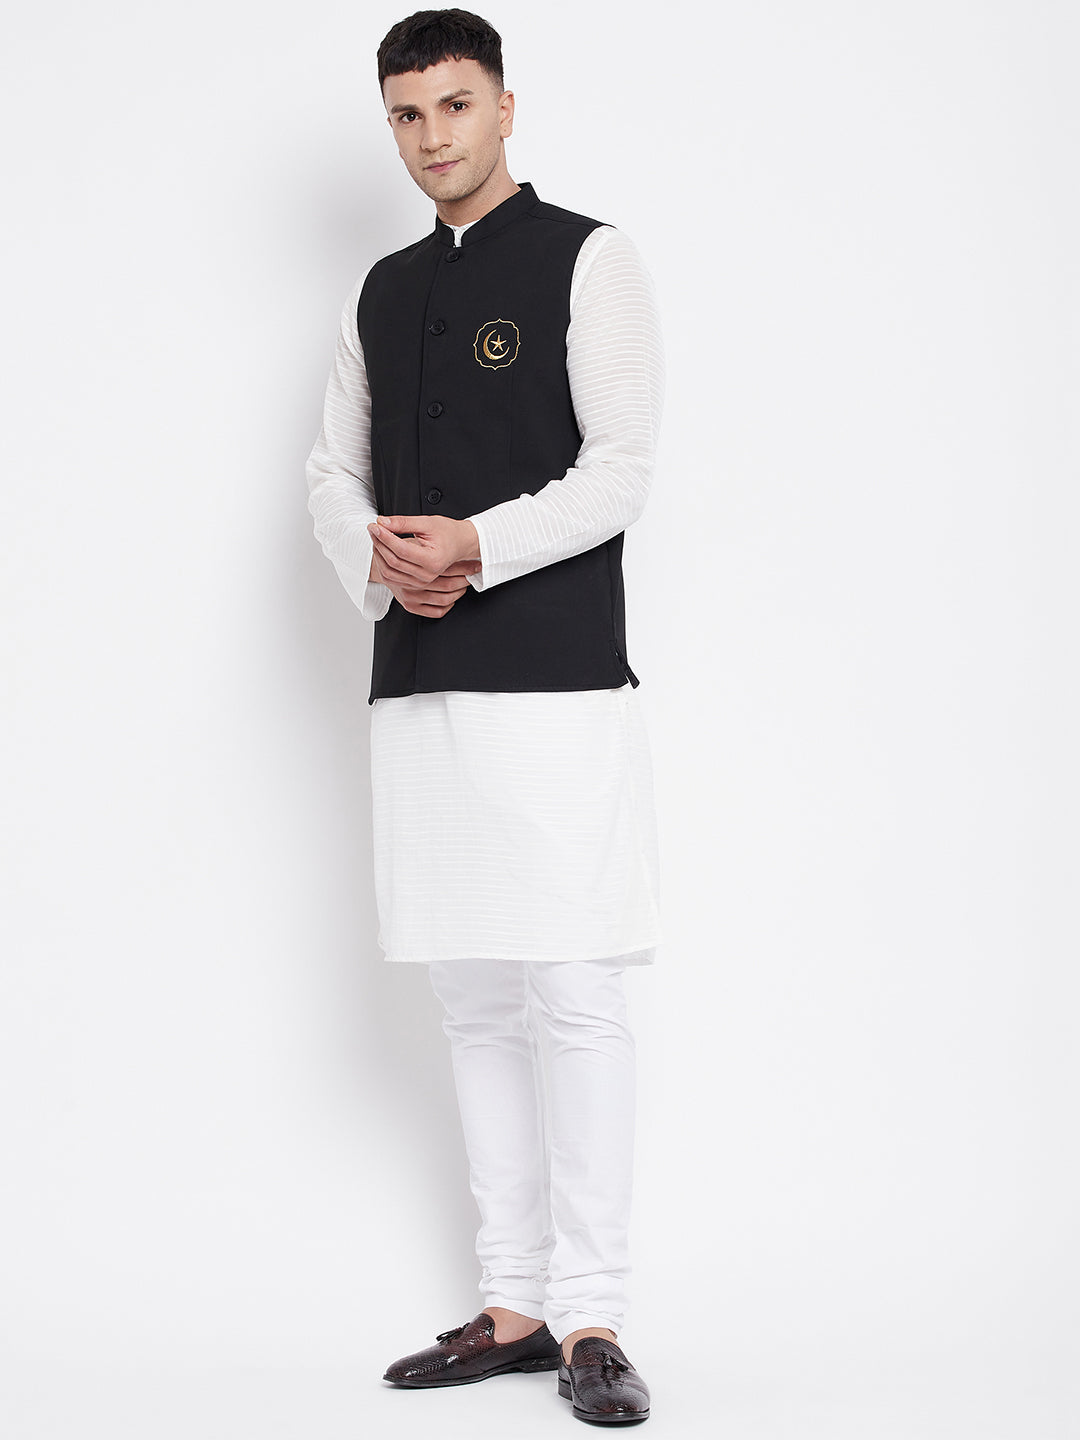 Men's White Kurta Sets with Eid Insignia Jackets(2PC) - Even Apparels